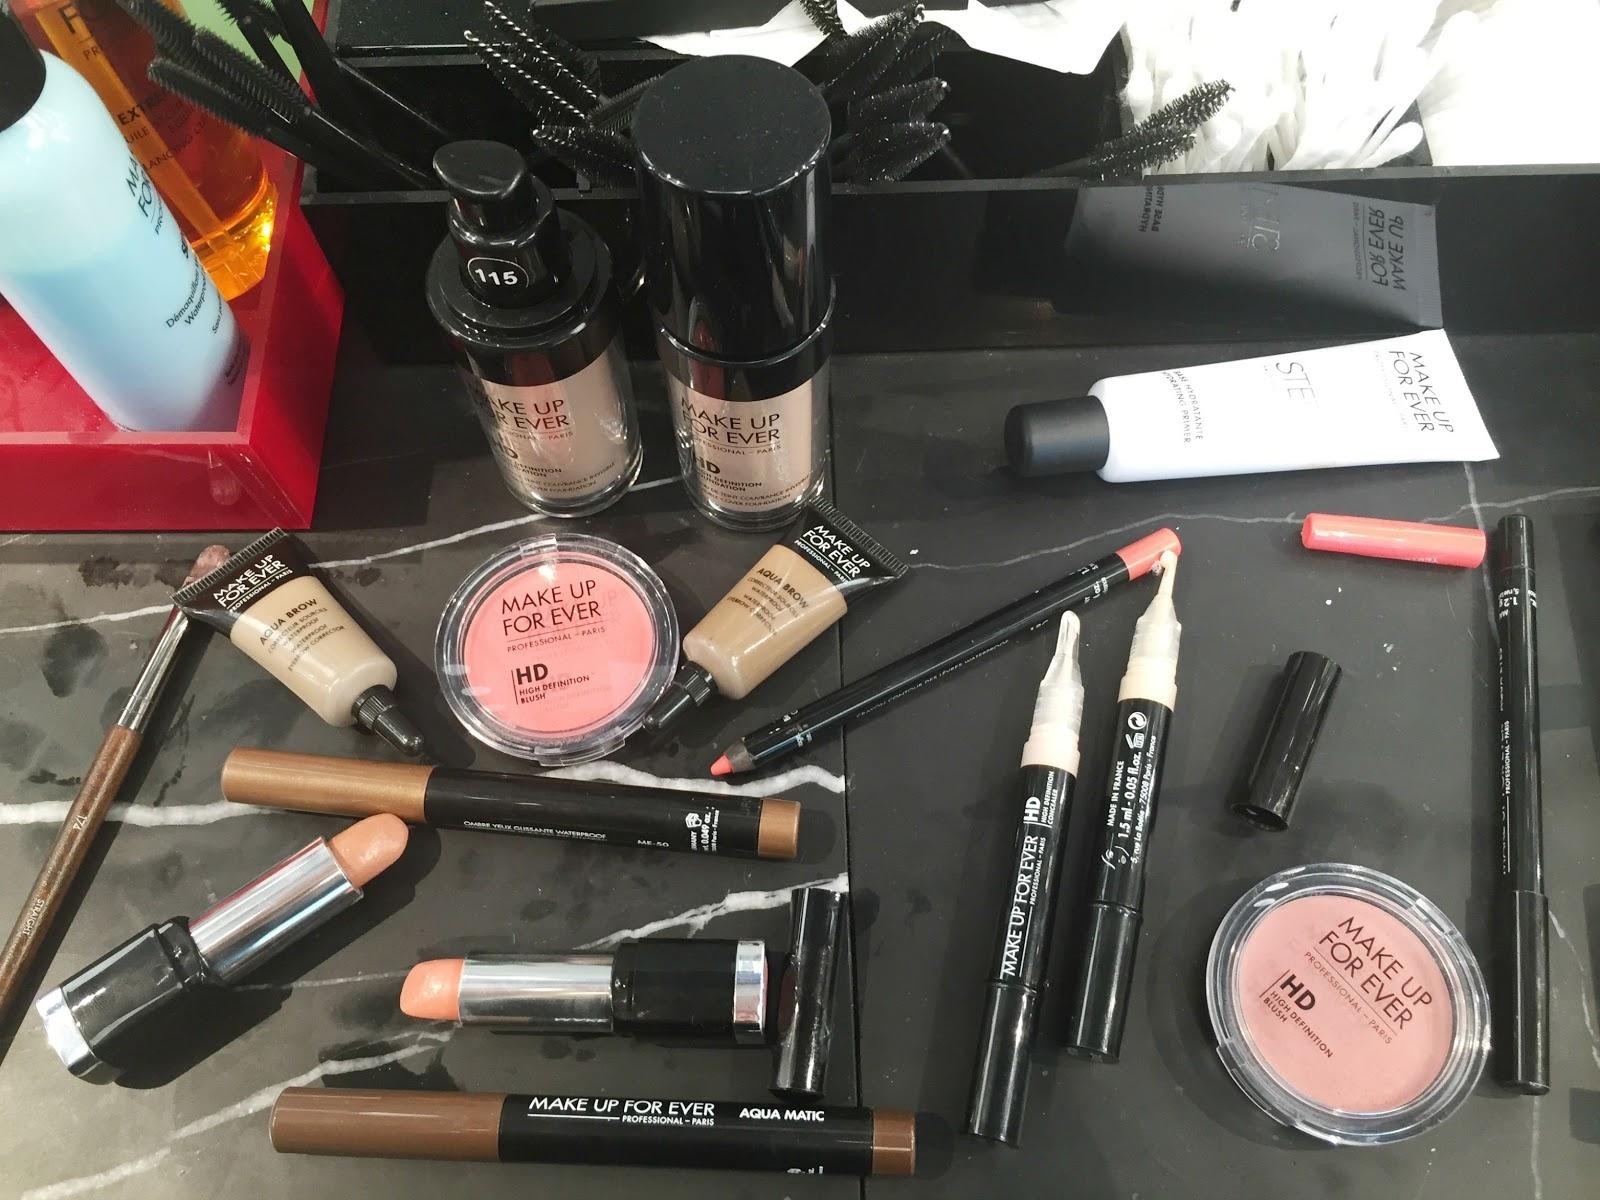 a picture of Make Up For Ever Birmingham Debenhams products for makeover